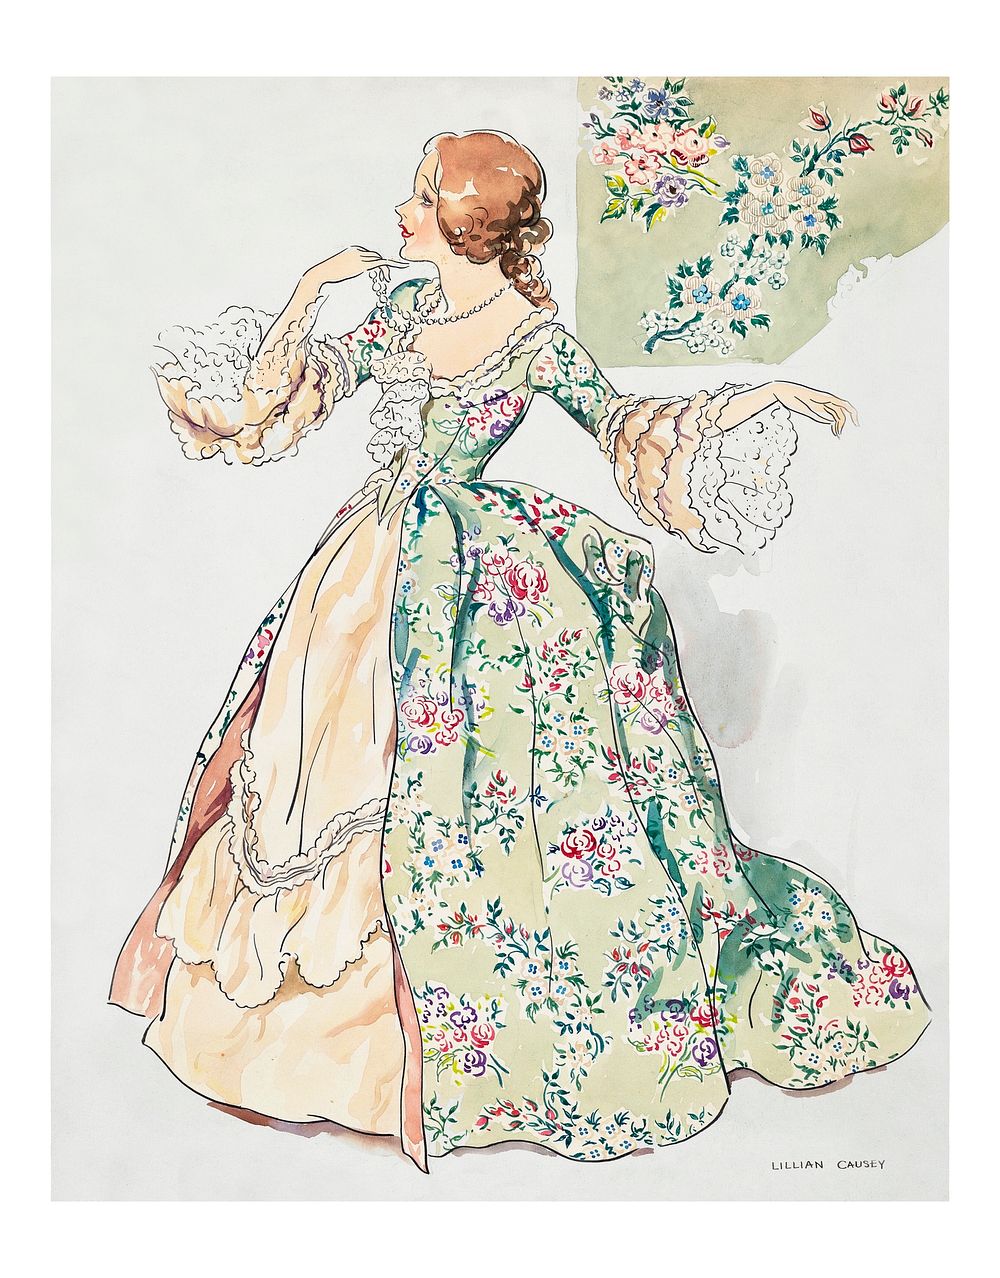 Lady's Costume art print (1936) by Lillian Causey. Original from The National Gallery of Art. Digitally enhanced by rawpixel.